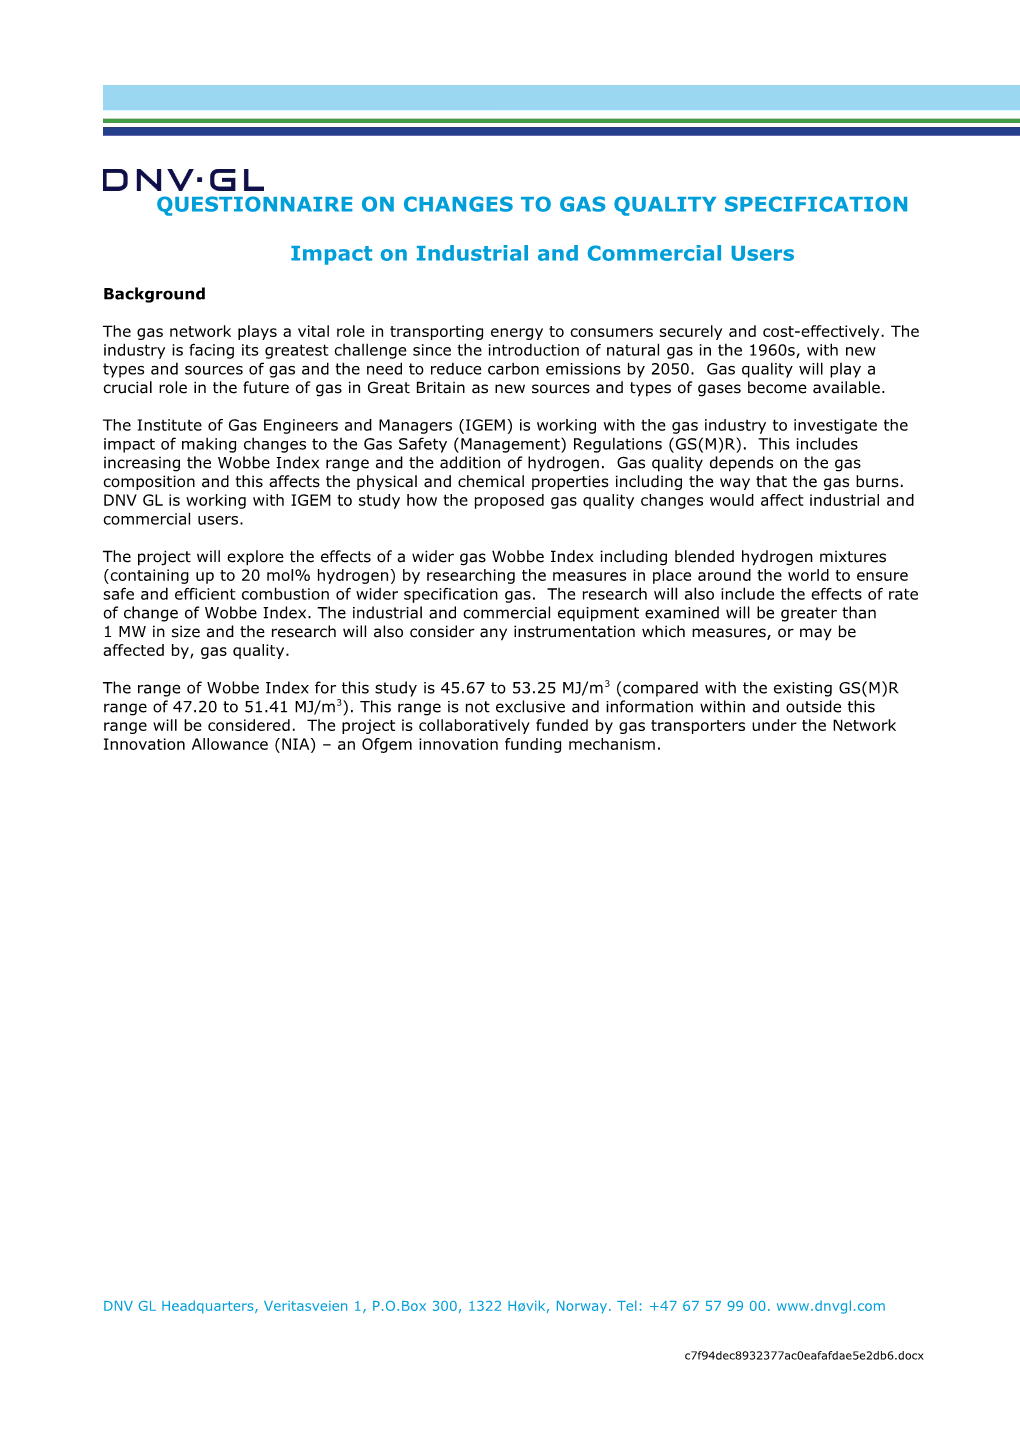 Questionnaire on Changes to Gas Quality Specification